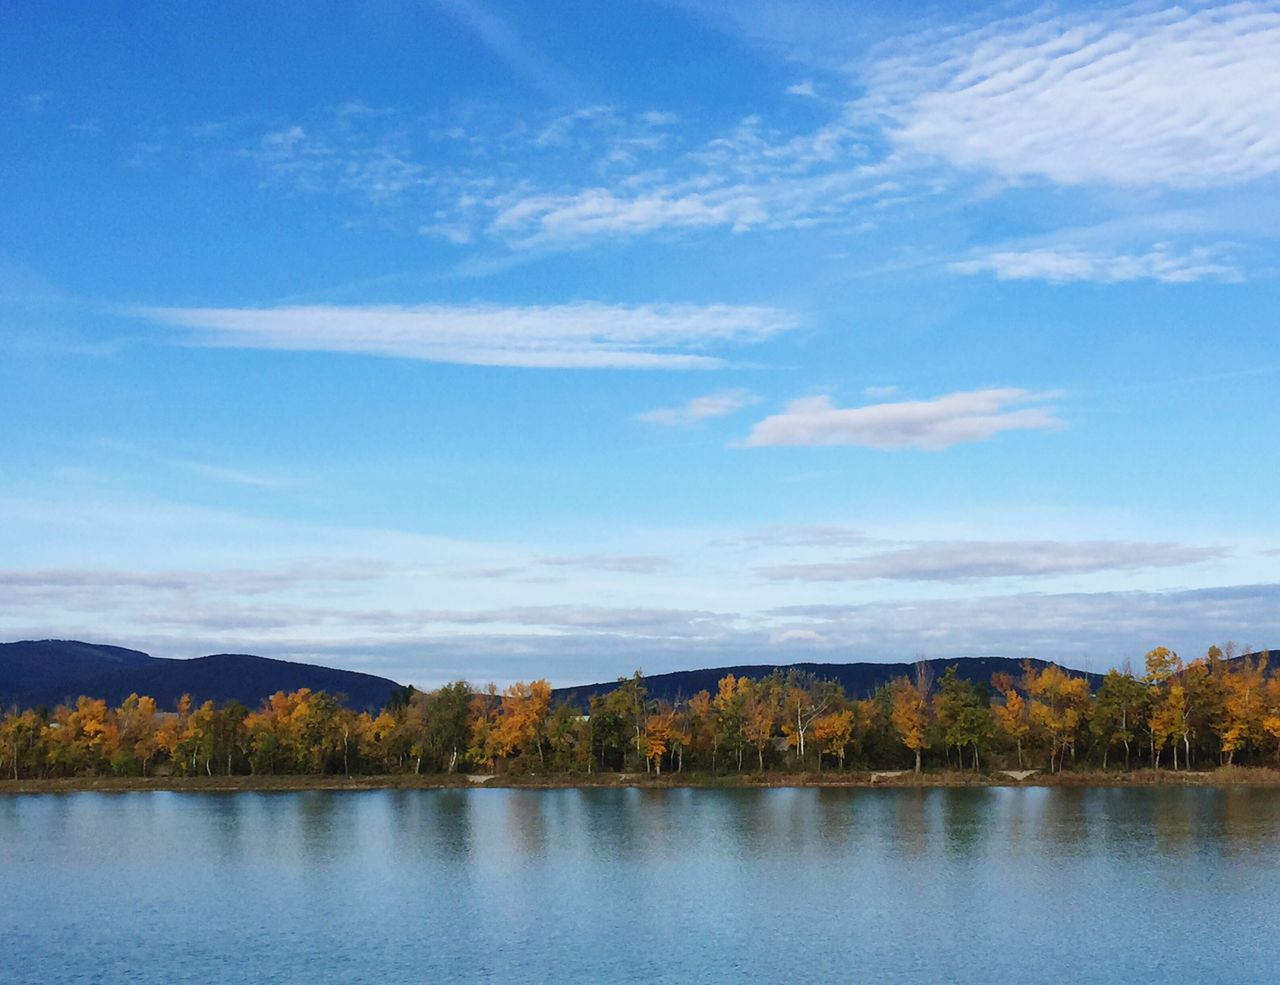 SCENIC VIEW OF LAKE AND TREES AGAINST BLUE SKY